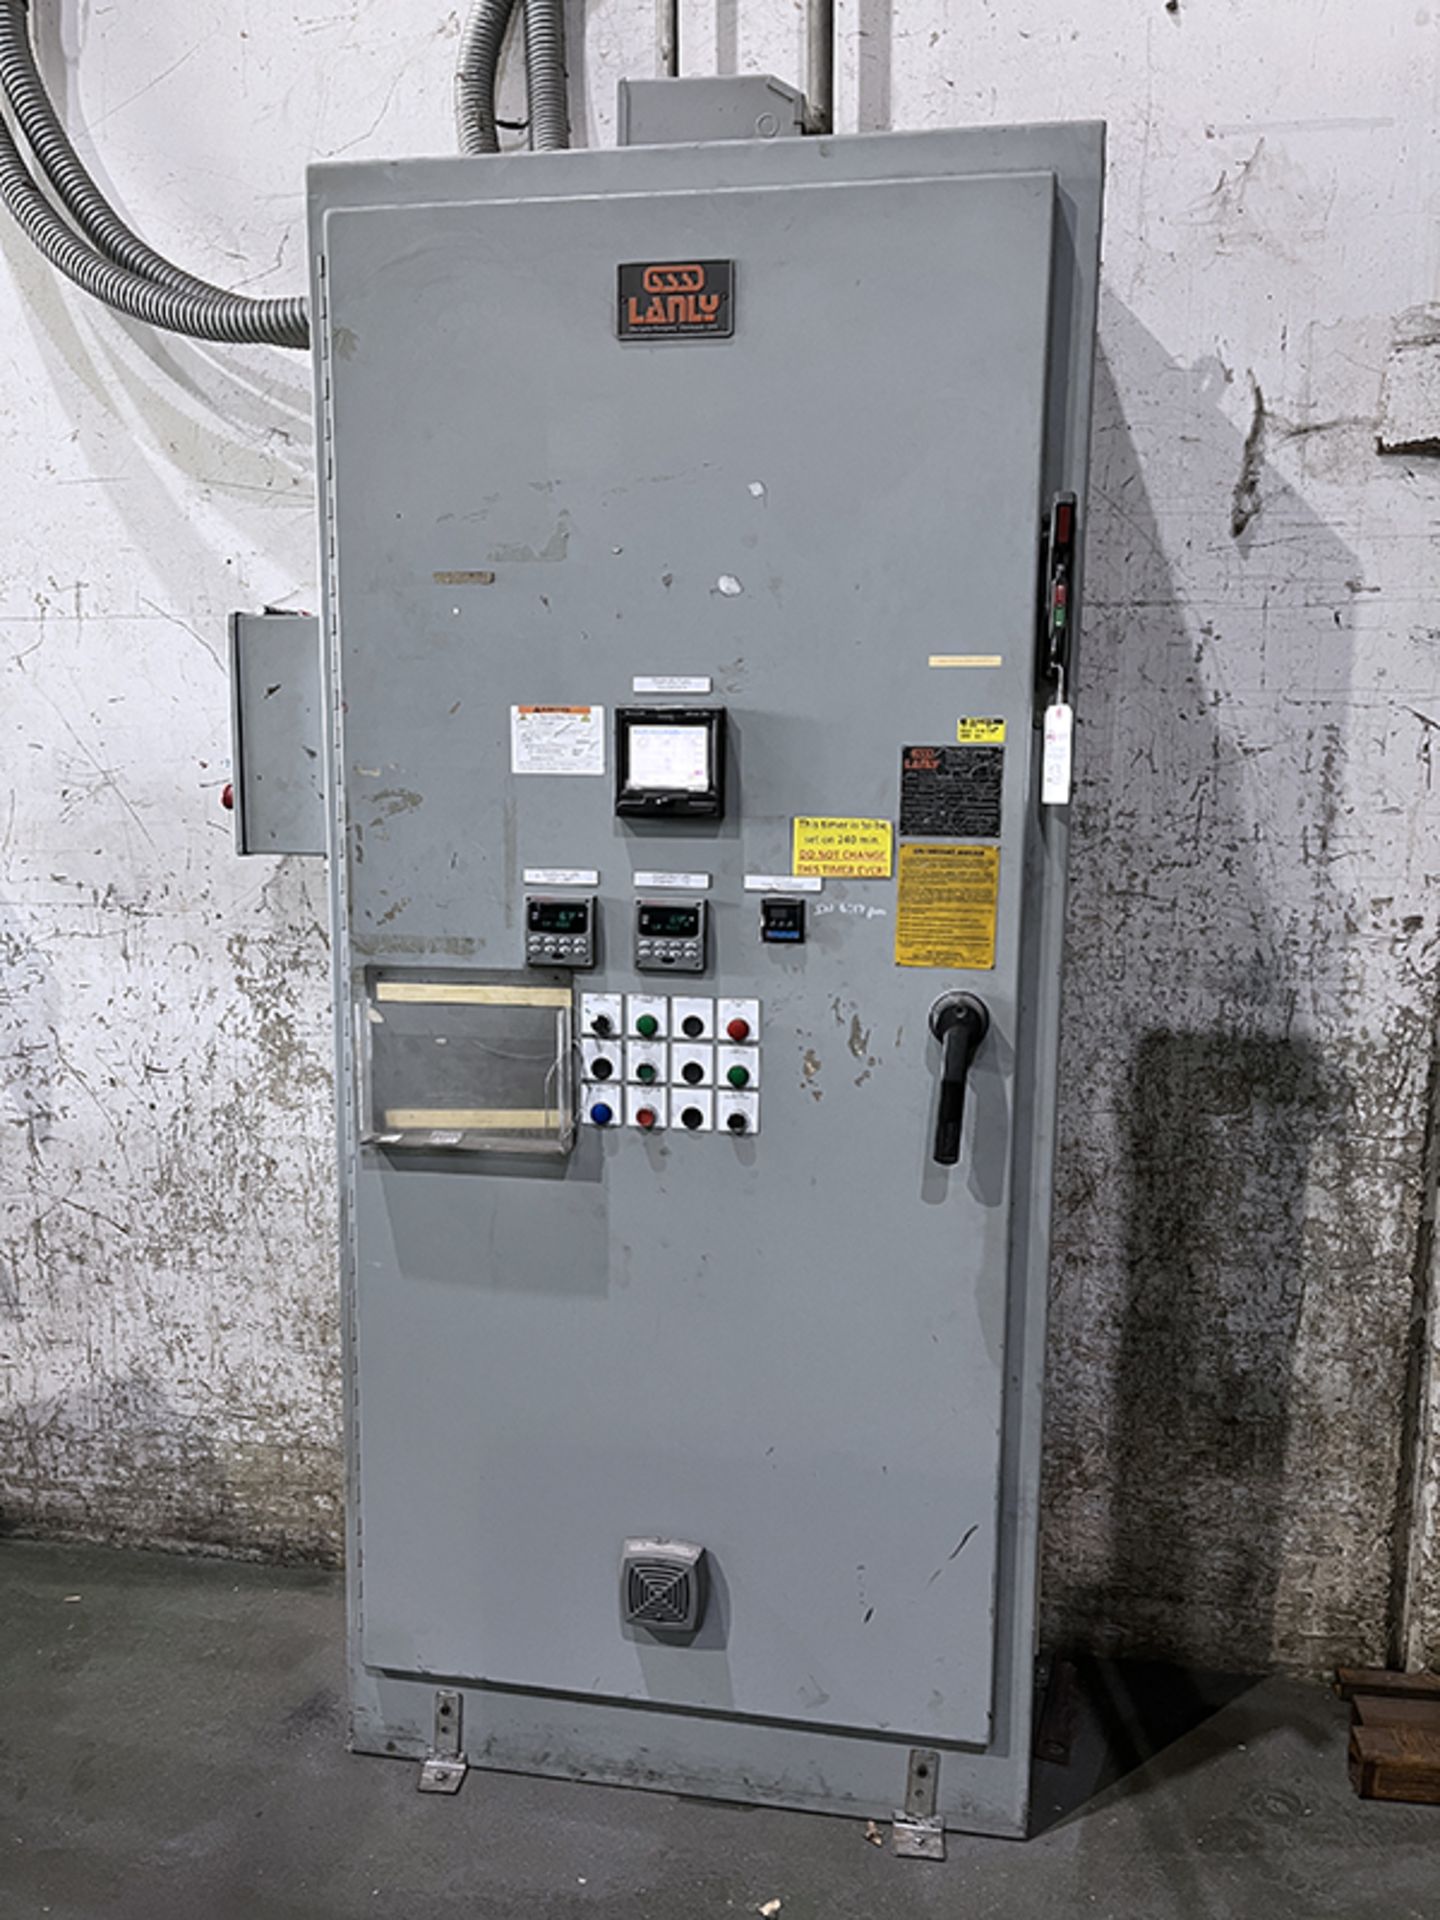 Lanly Electric Annealing Oven - Image 13 of 21